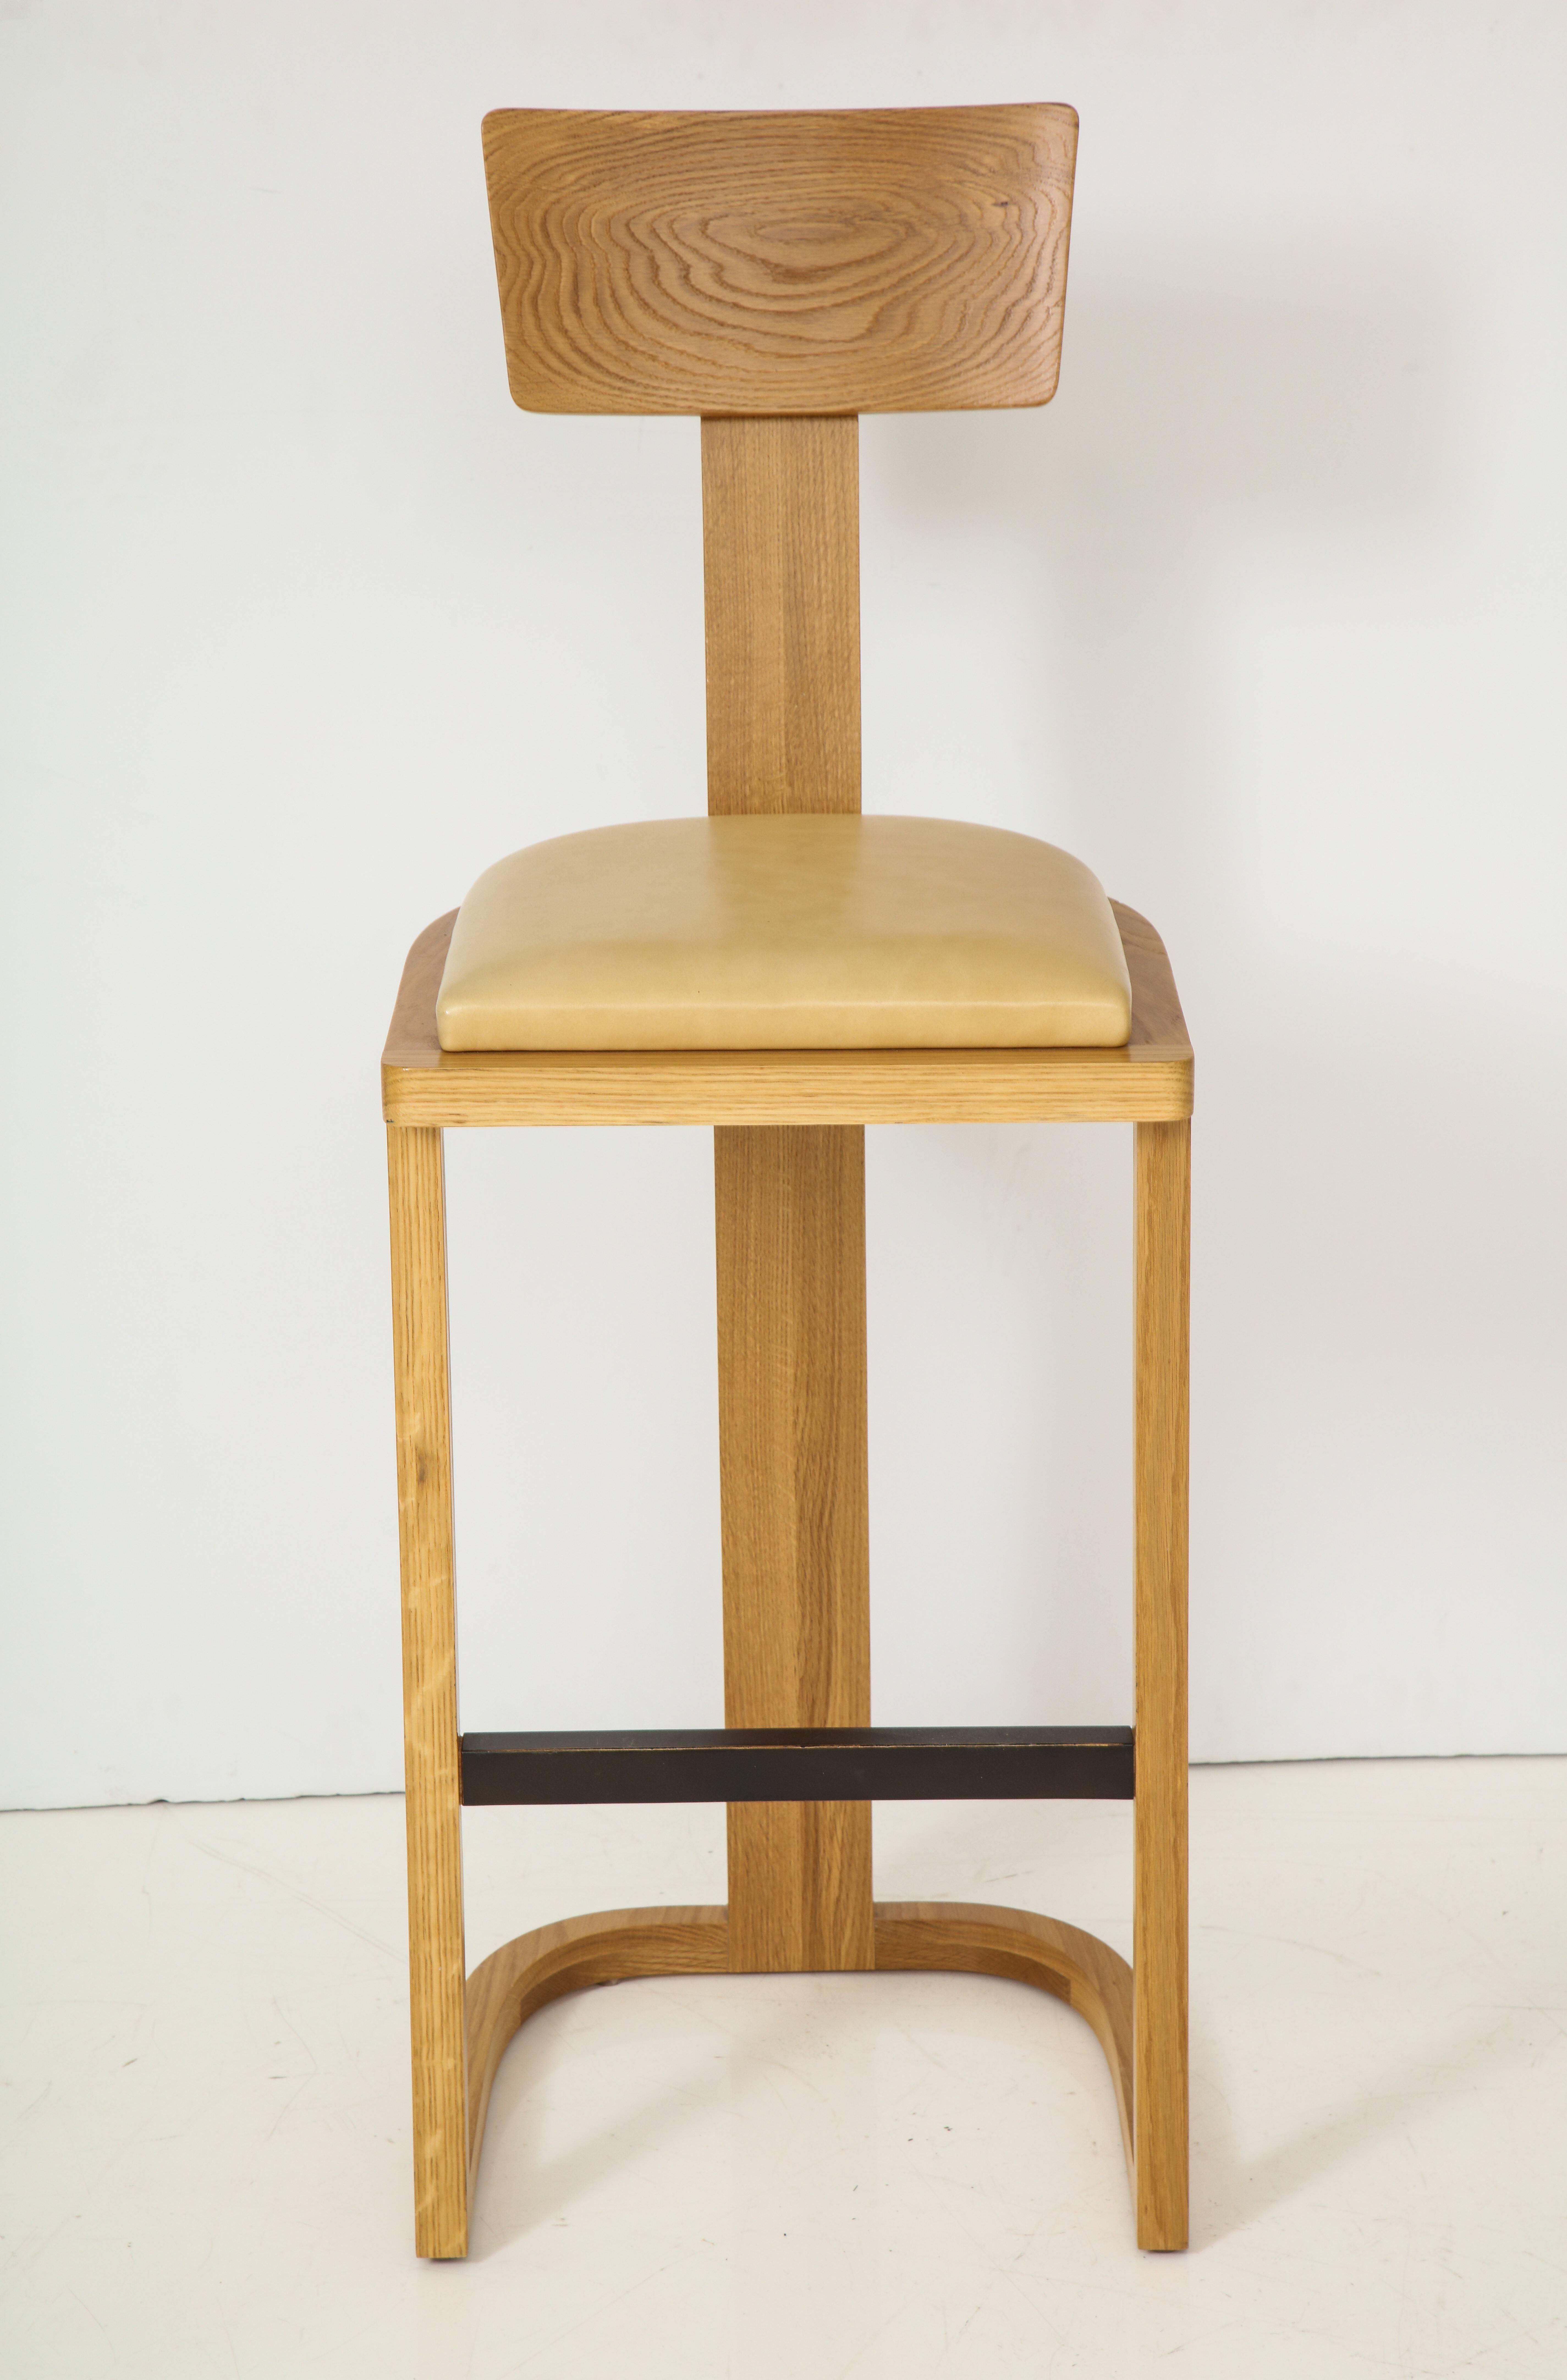 Solid oakwood barstool with U-shaped base and a slightly pitched, T-shaped backrest. Made in Los Angeles.